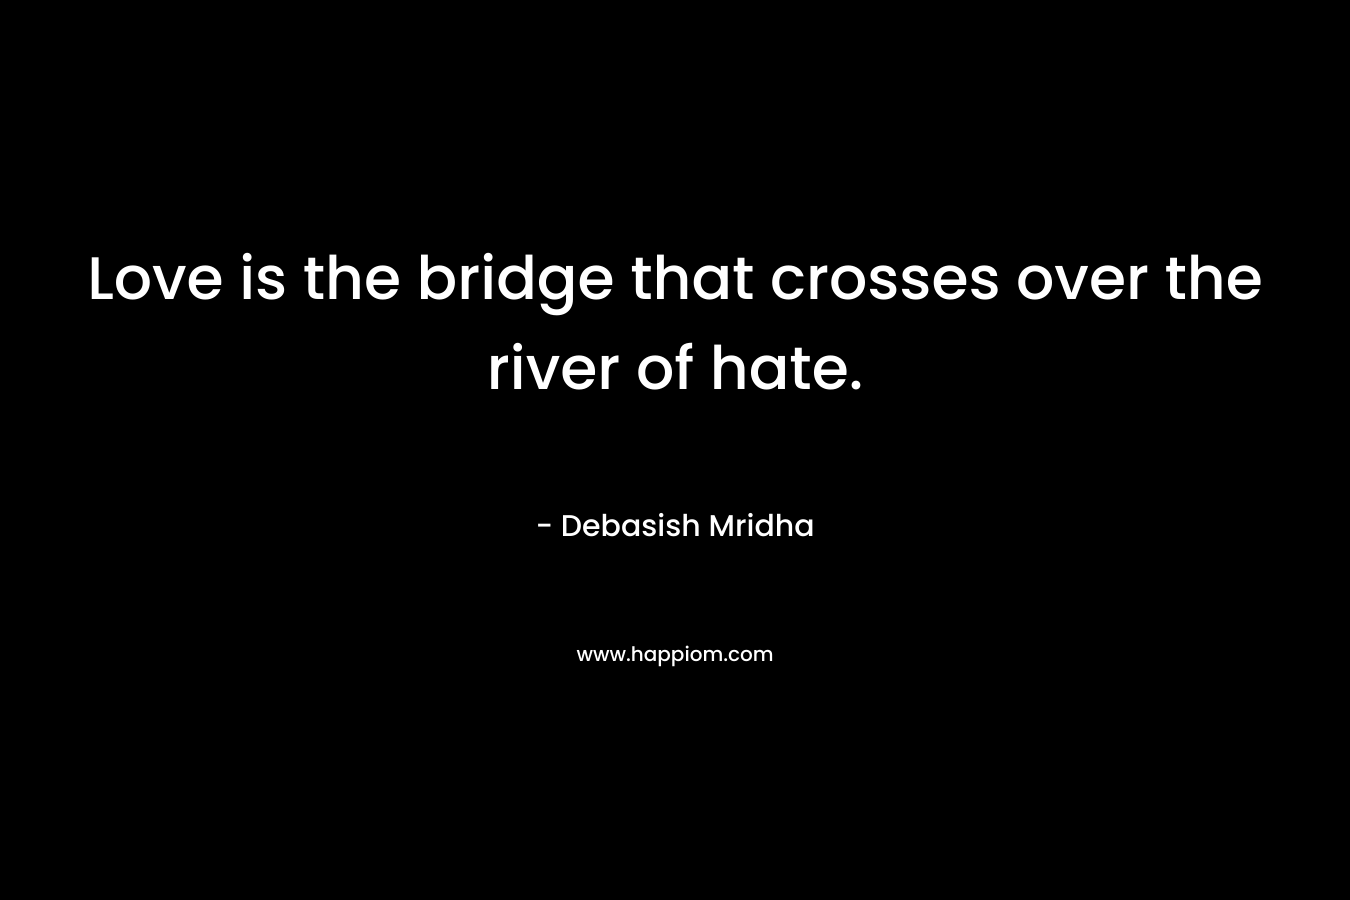 Love is the bridge that crosses over the river of hate.